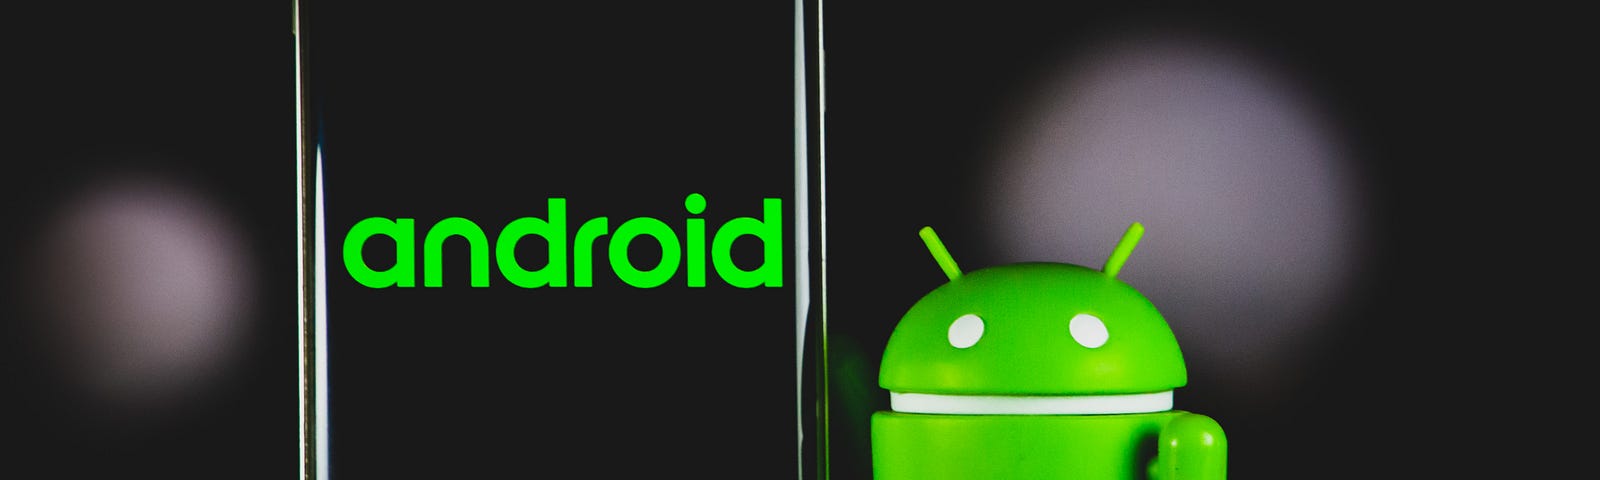 Android cell phone and mascot.